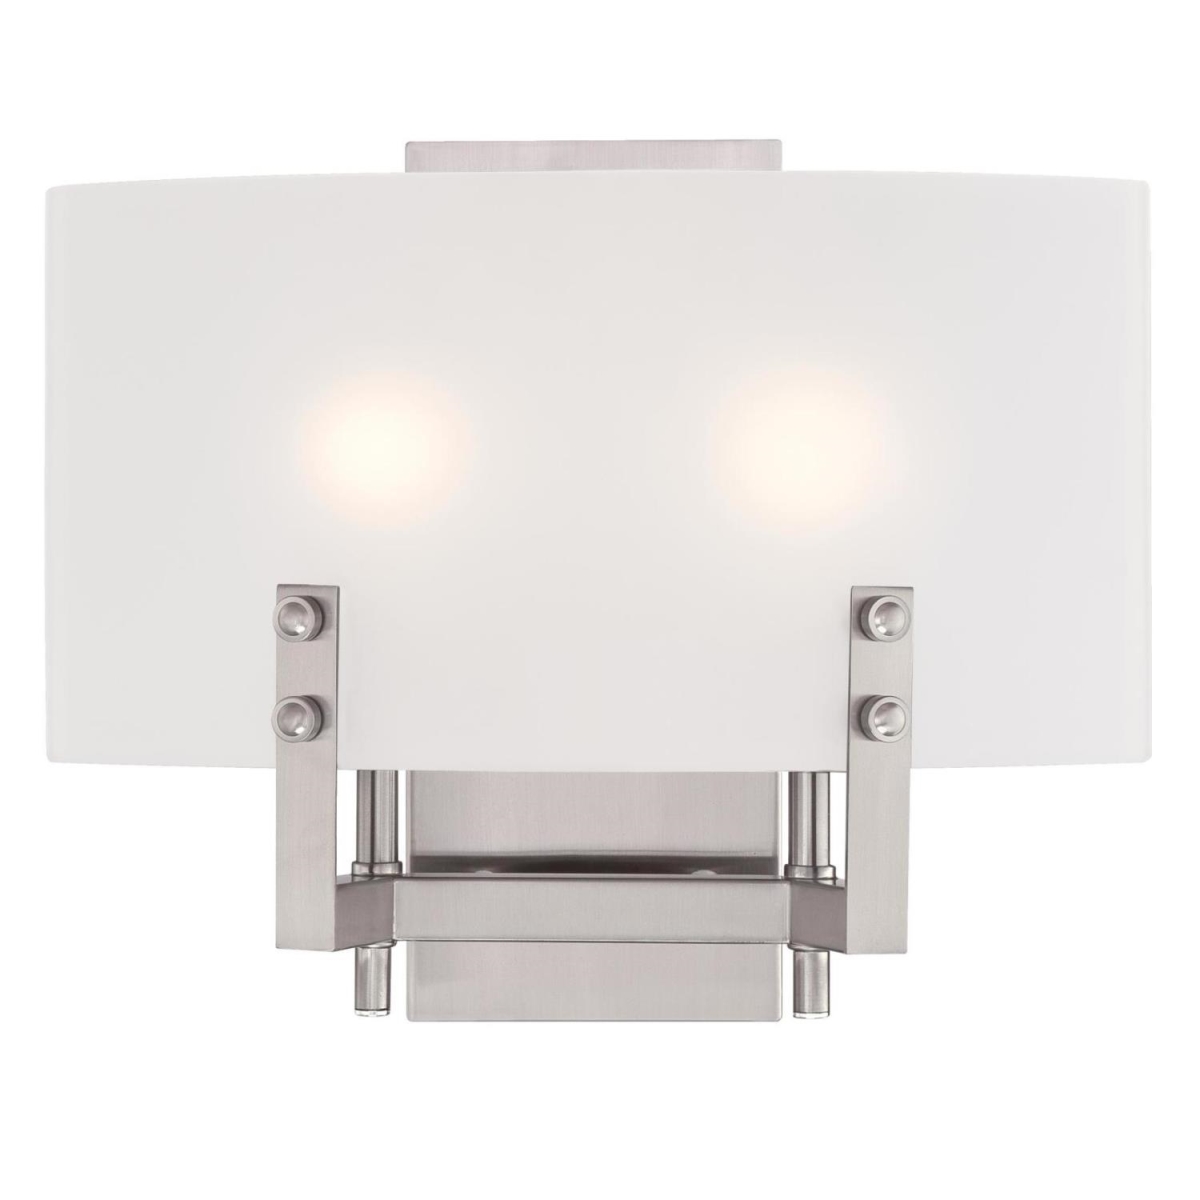 6369600 2 Light Wall Fixture With Frosted Glass - Brushed Nickel